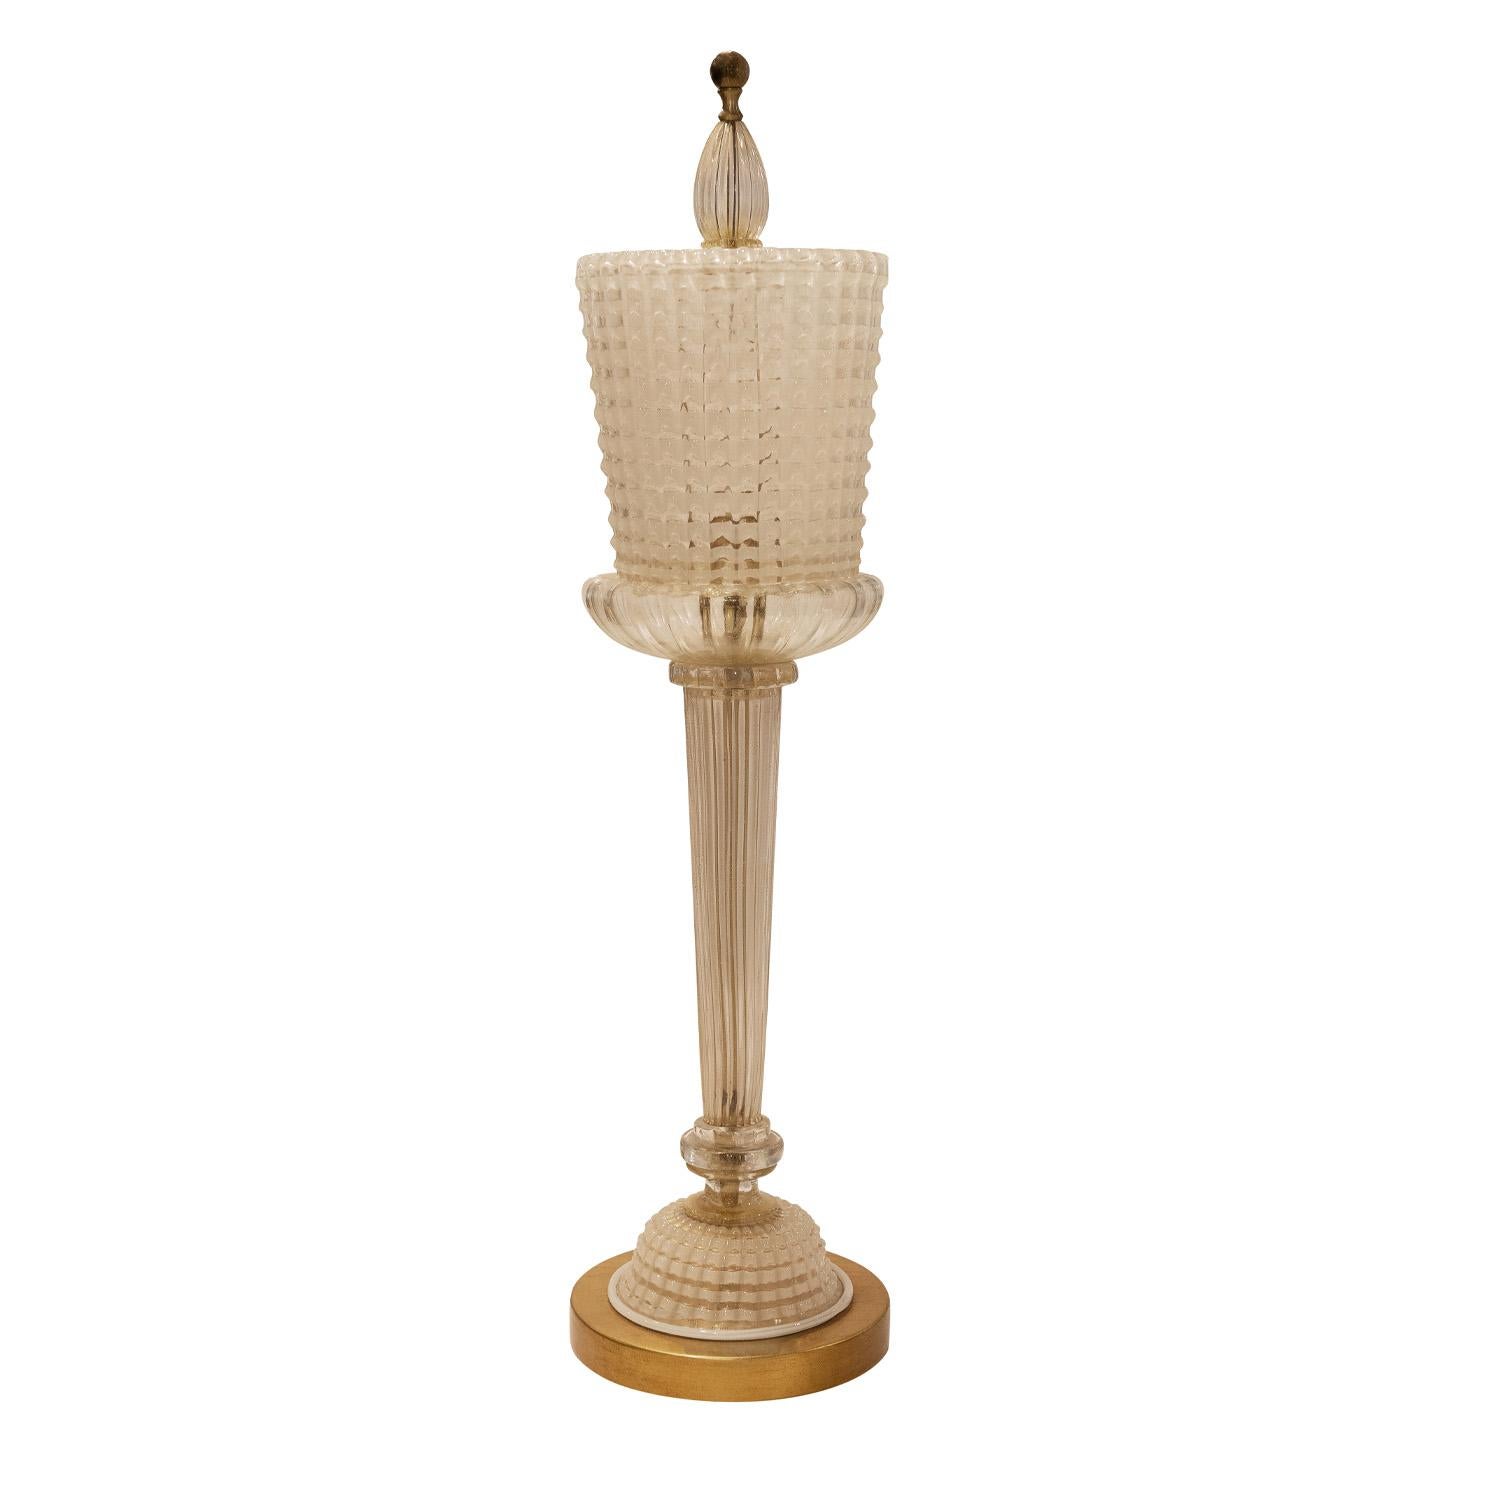 Exquisite and superbly executed hand-blown glass torchere table lamp with gold foil on a gilded base by Seguso, Murano Italy, 1950's. The artisanship involved in blowing a table lamps of this scale and complexity is simply incredible. In 2001, this